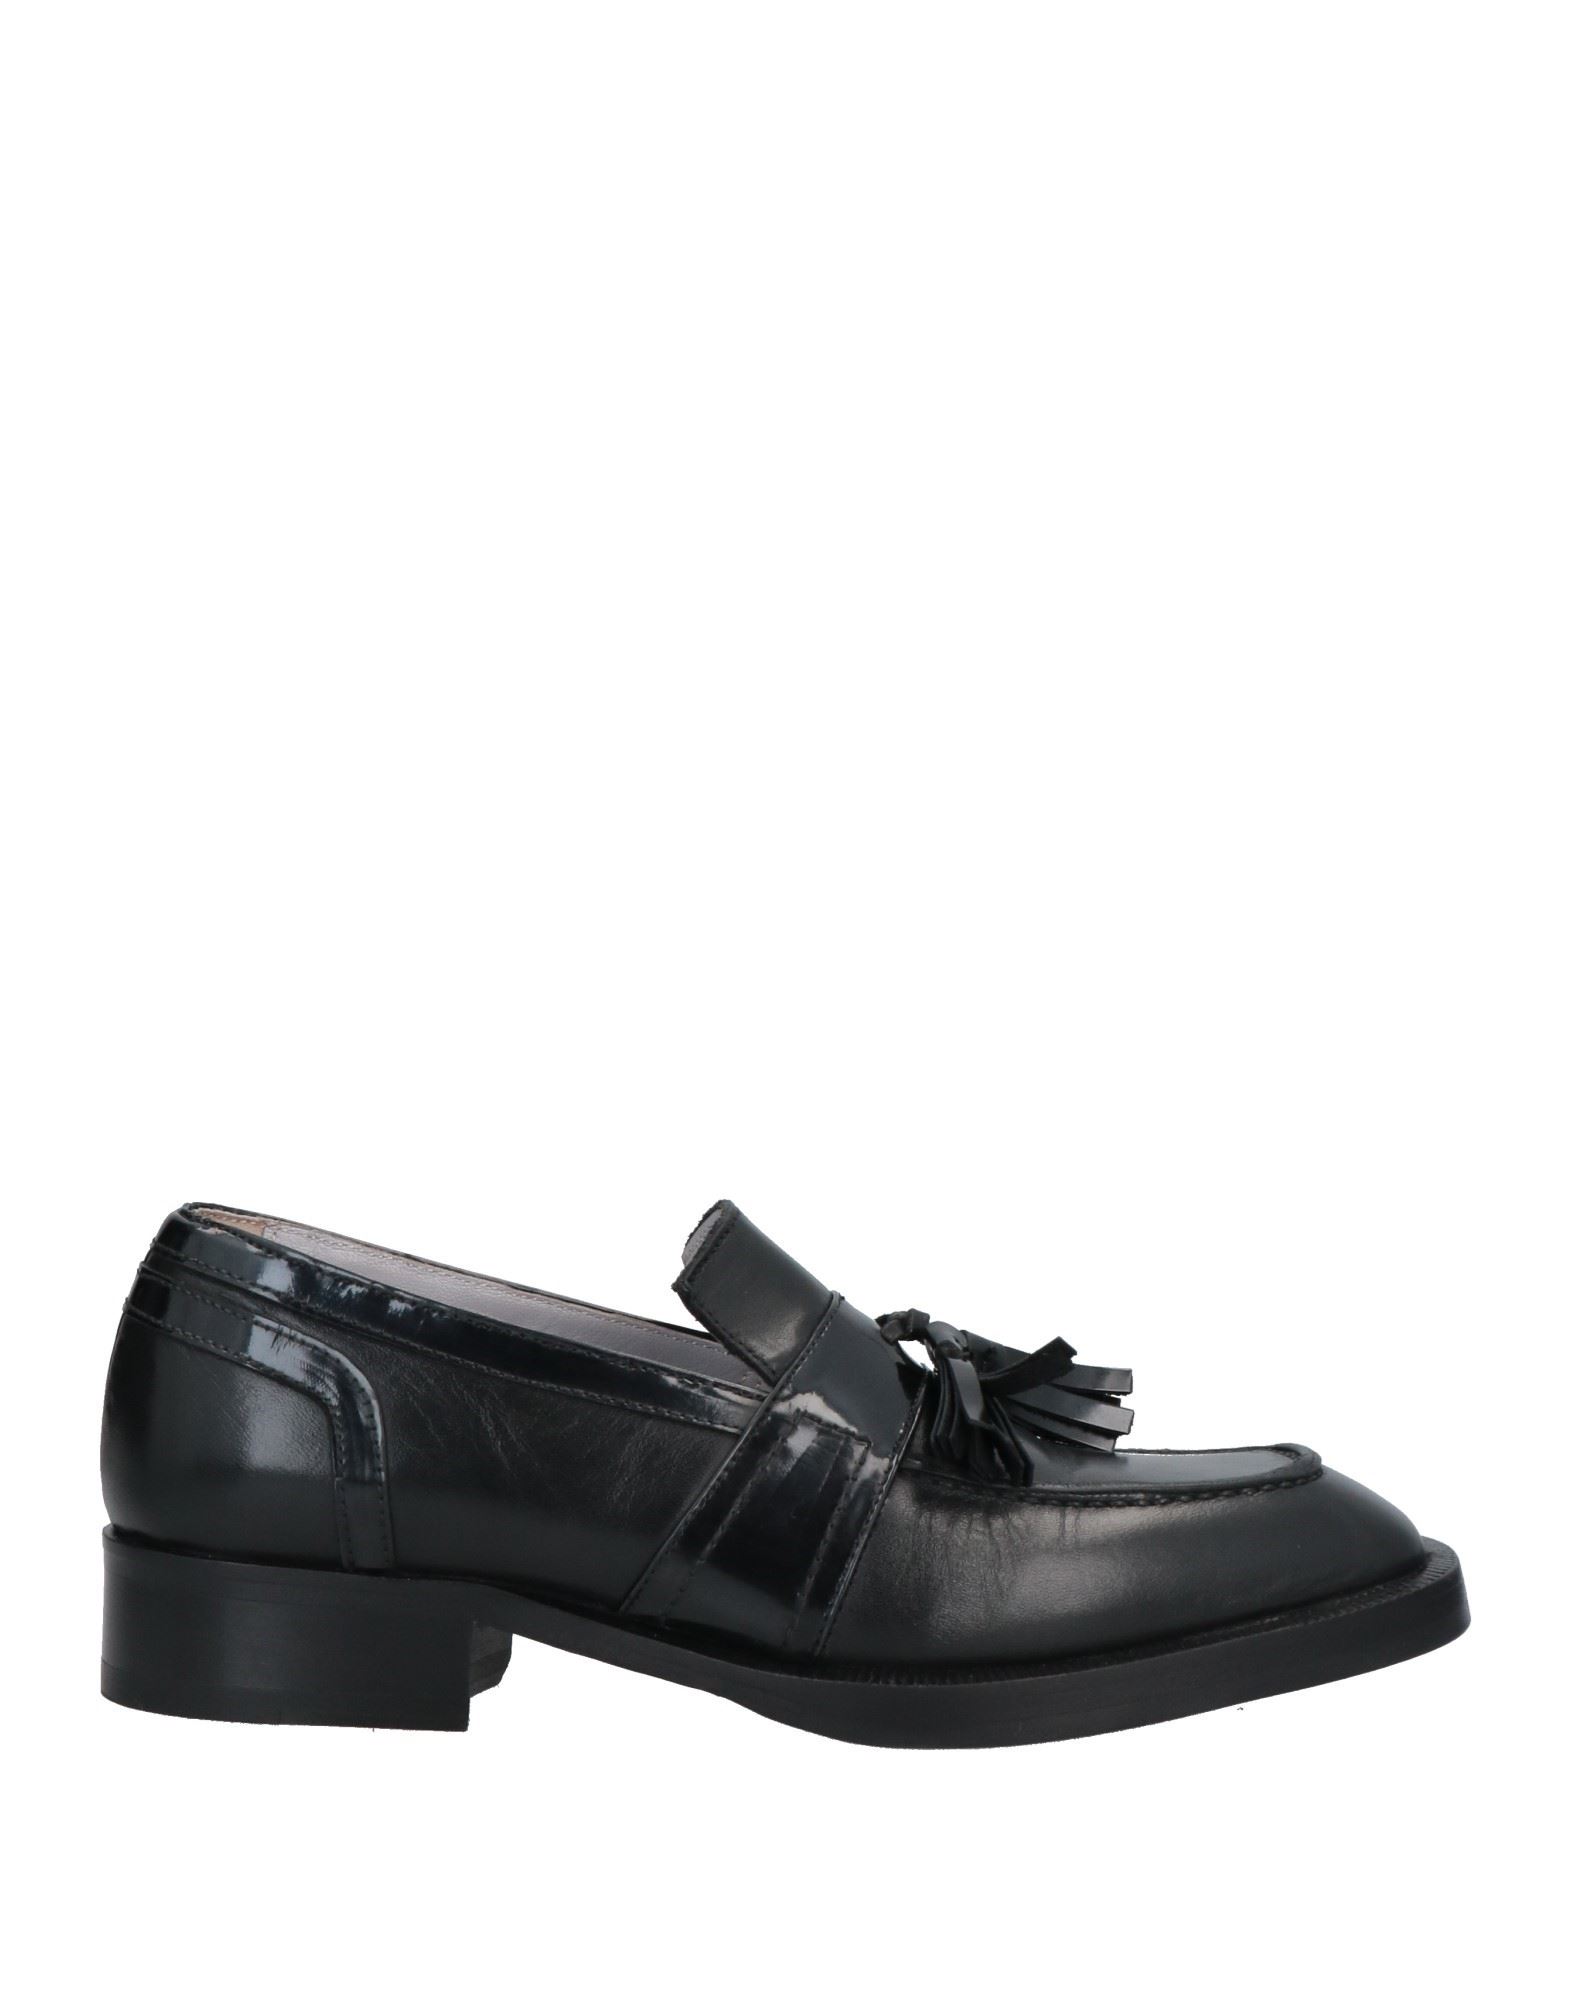 Shop Pollini Woman Loafers Black Size 6 Leather